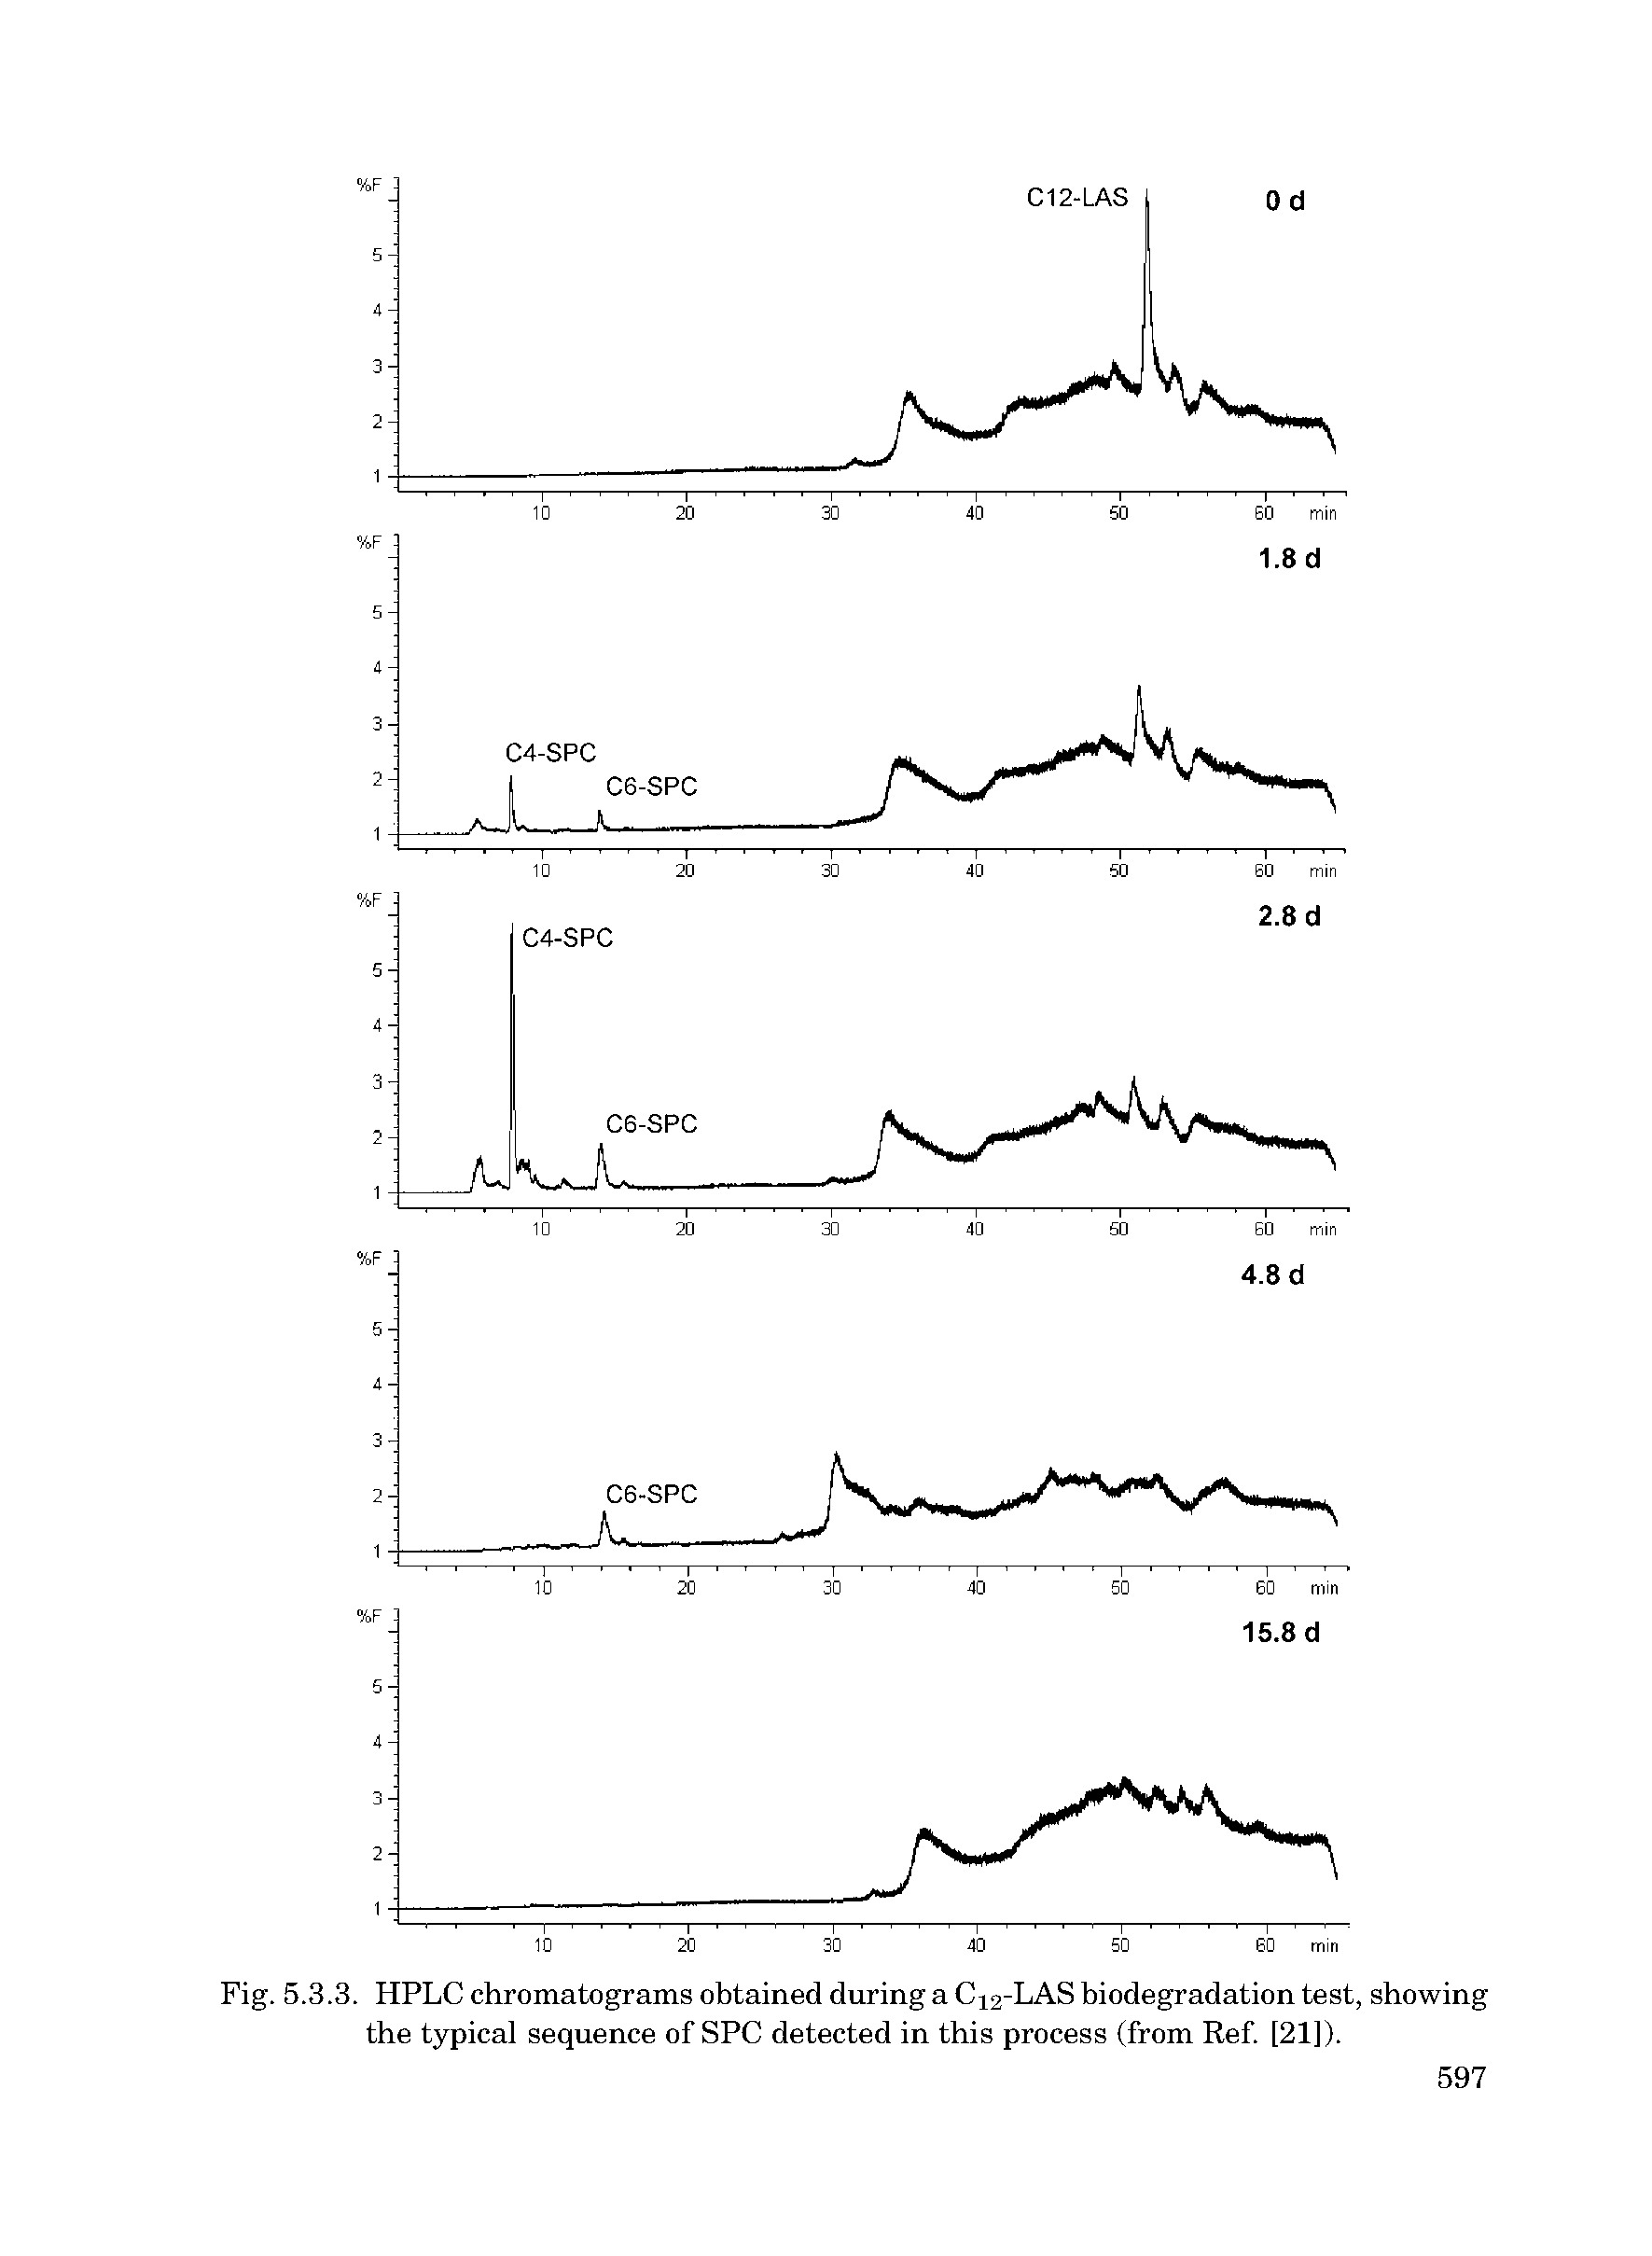 Fig. 5.3.3. HPLC chromatograms obtained during a C12-LAS biodegradation test, showing the typical sequence of SPC detected in this process (from Ref. [21]).